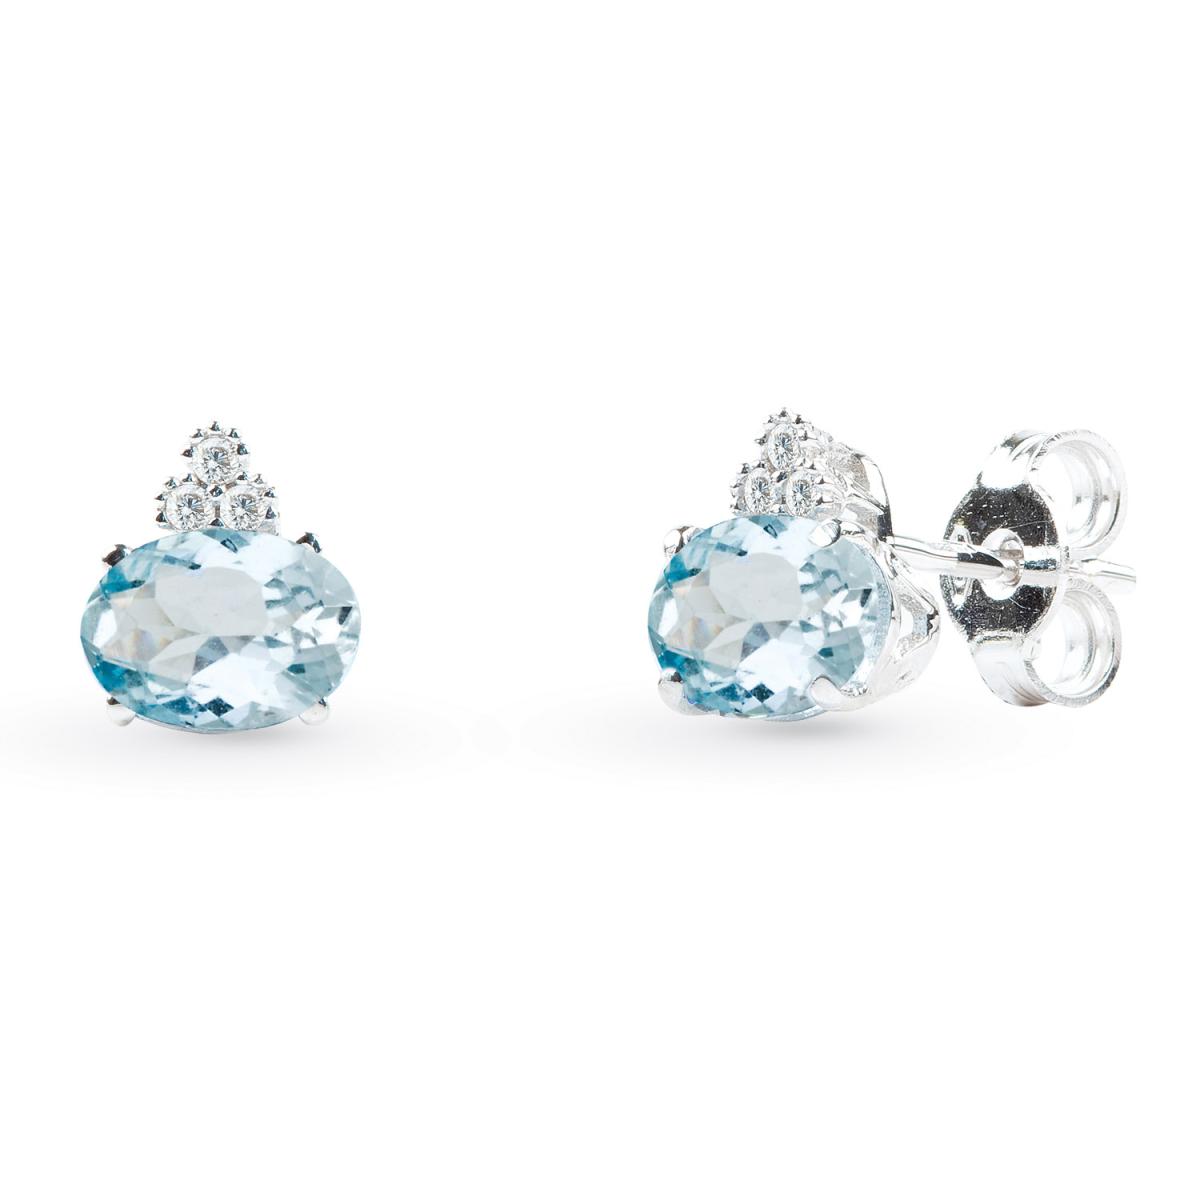 18 kt white gold earrings, with aquamarine and diamonds - OD187/AC-LB